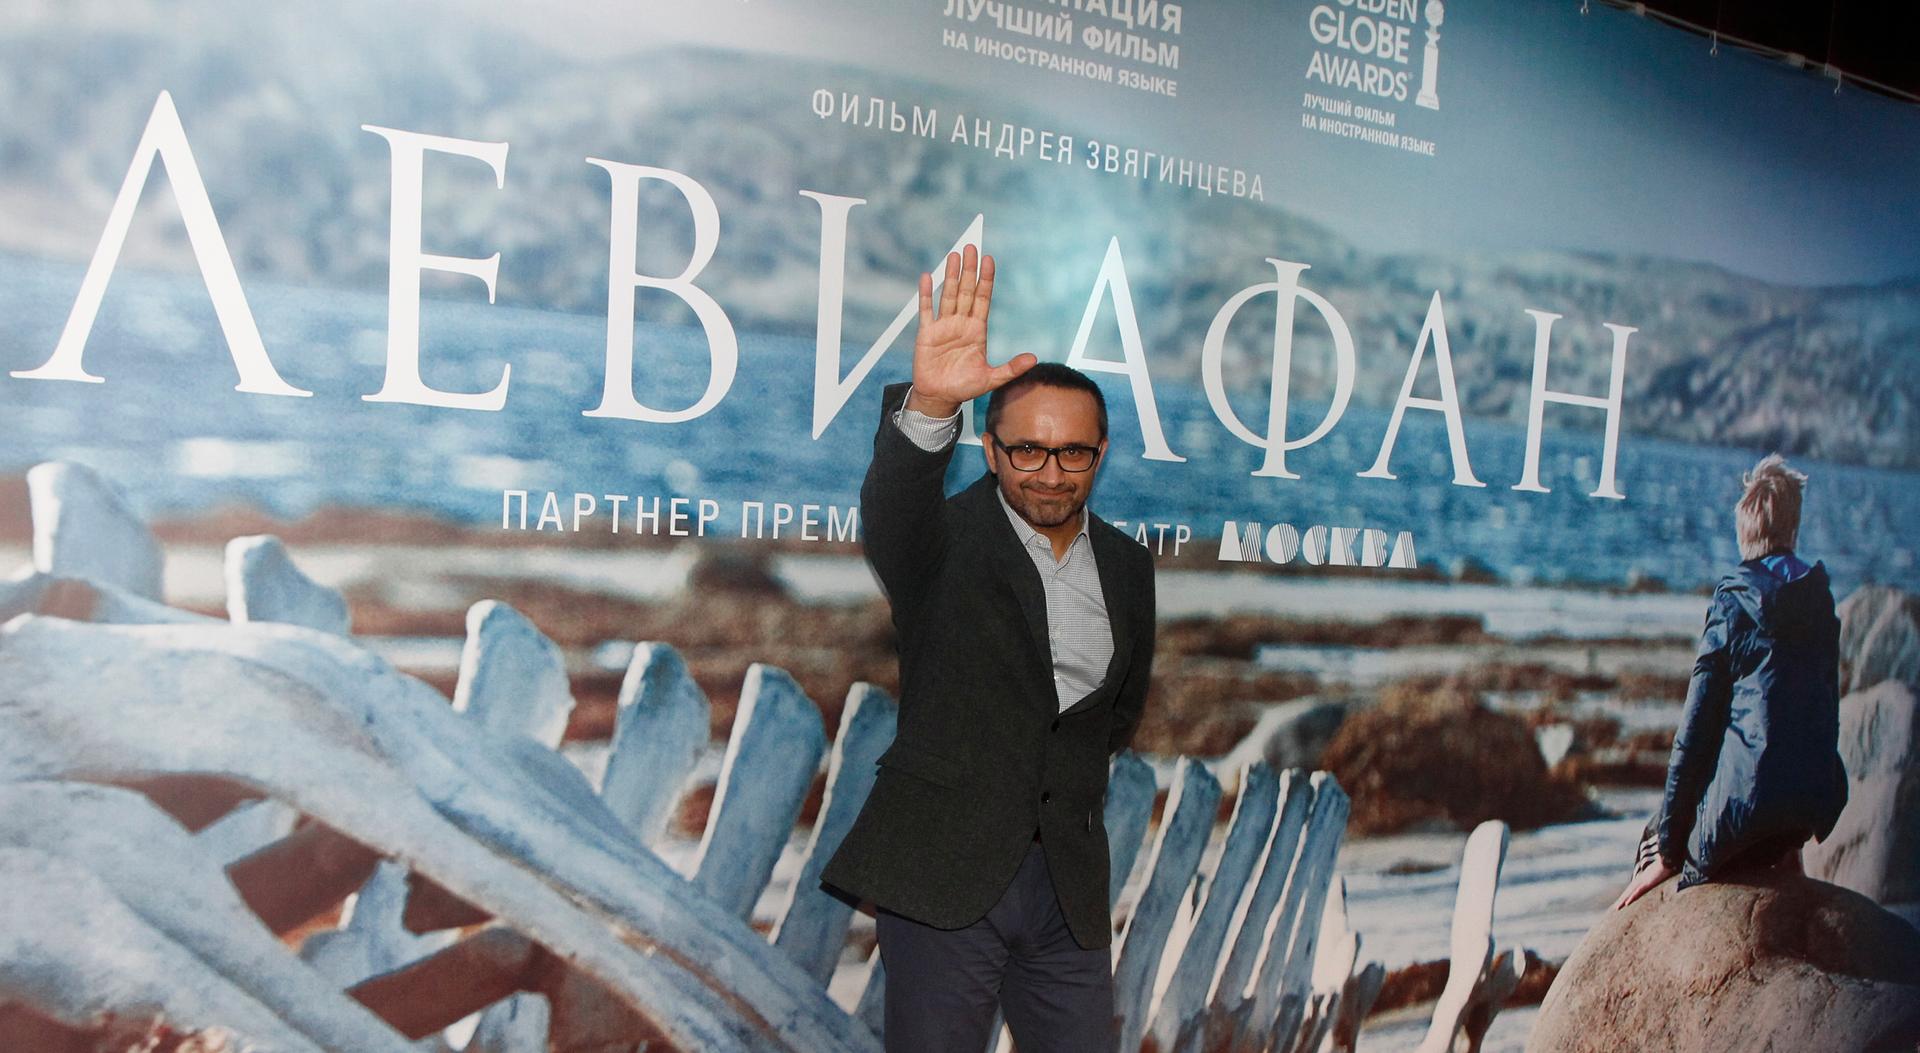 Director Andrey Zvyagintsev poses at the Russian premiere of his film "Leviathan" in Moscow.